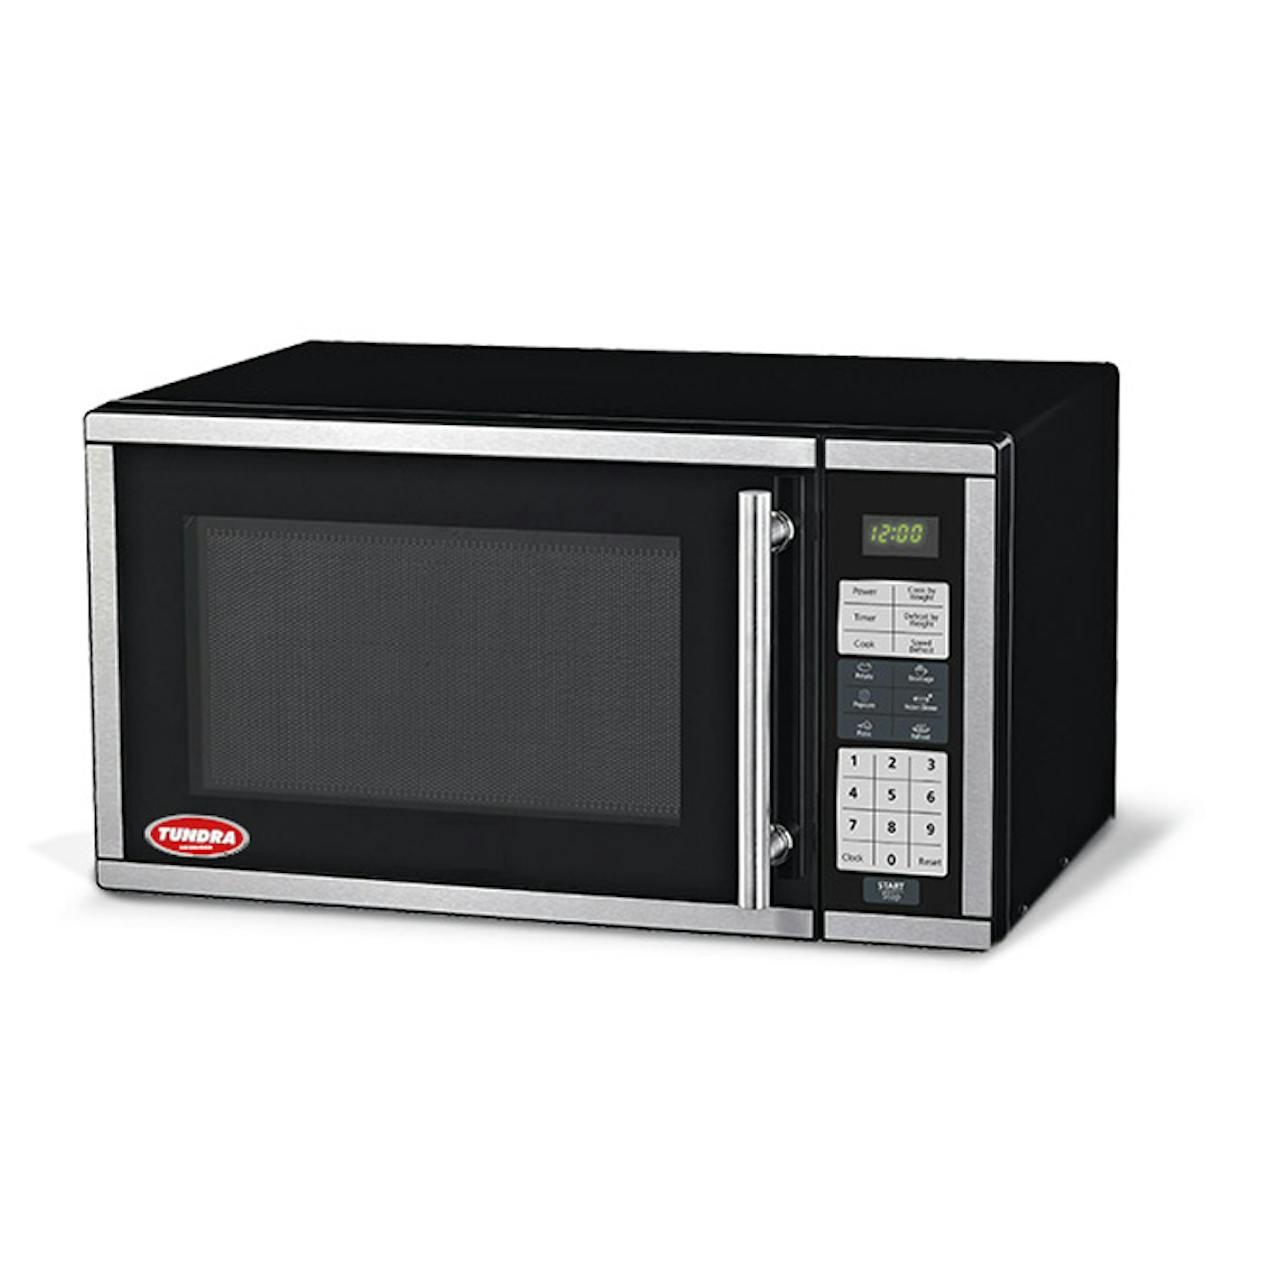 Tundra MW Series Truck Microwave Oven